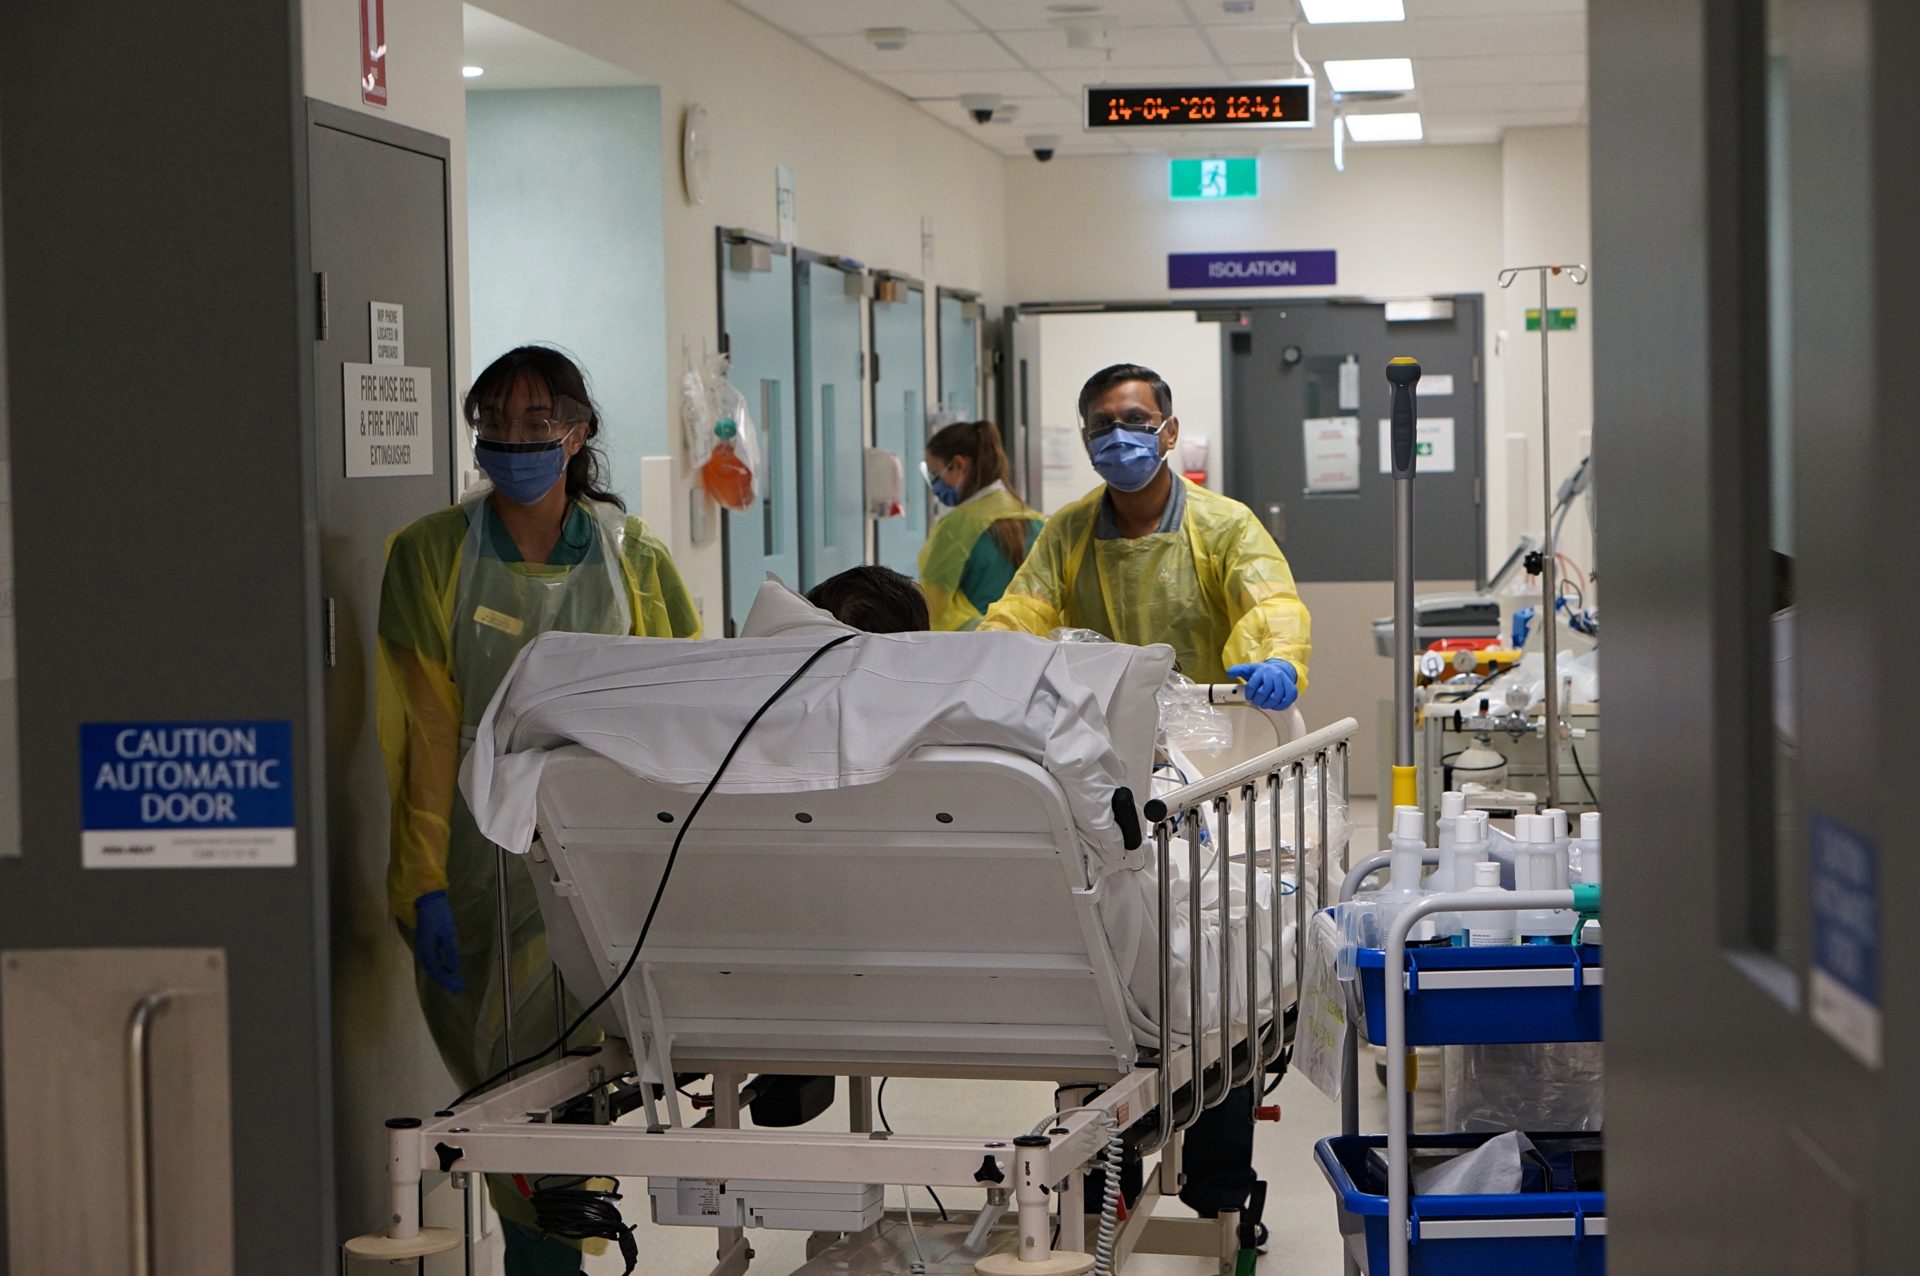 The calm before the storm: inside a quiet emergency department